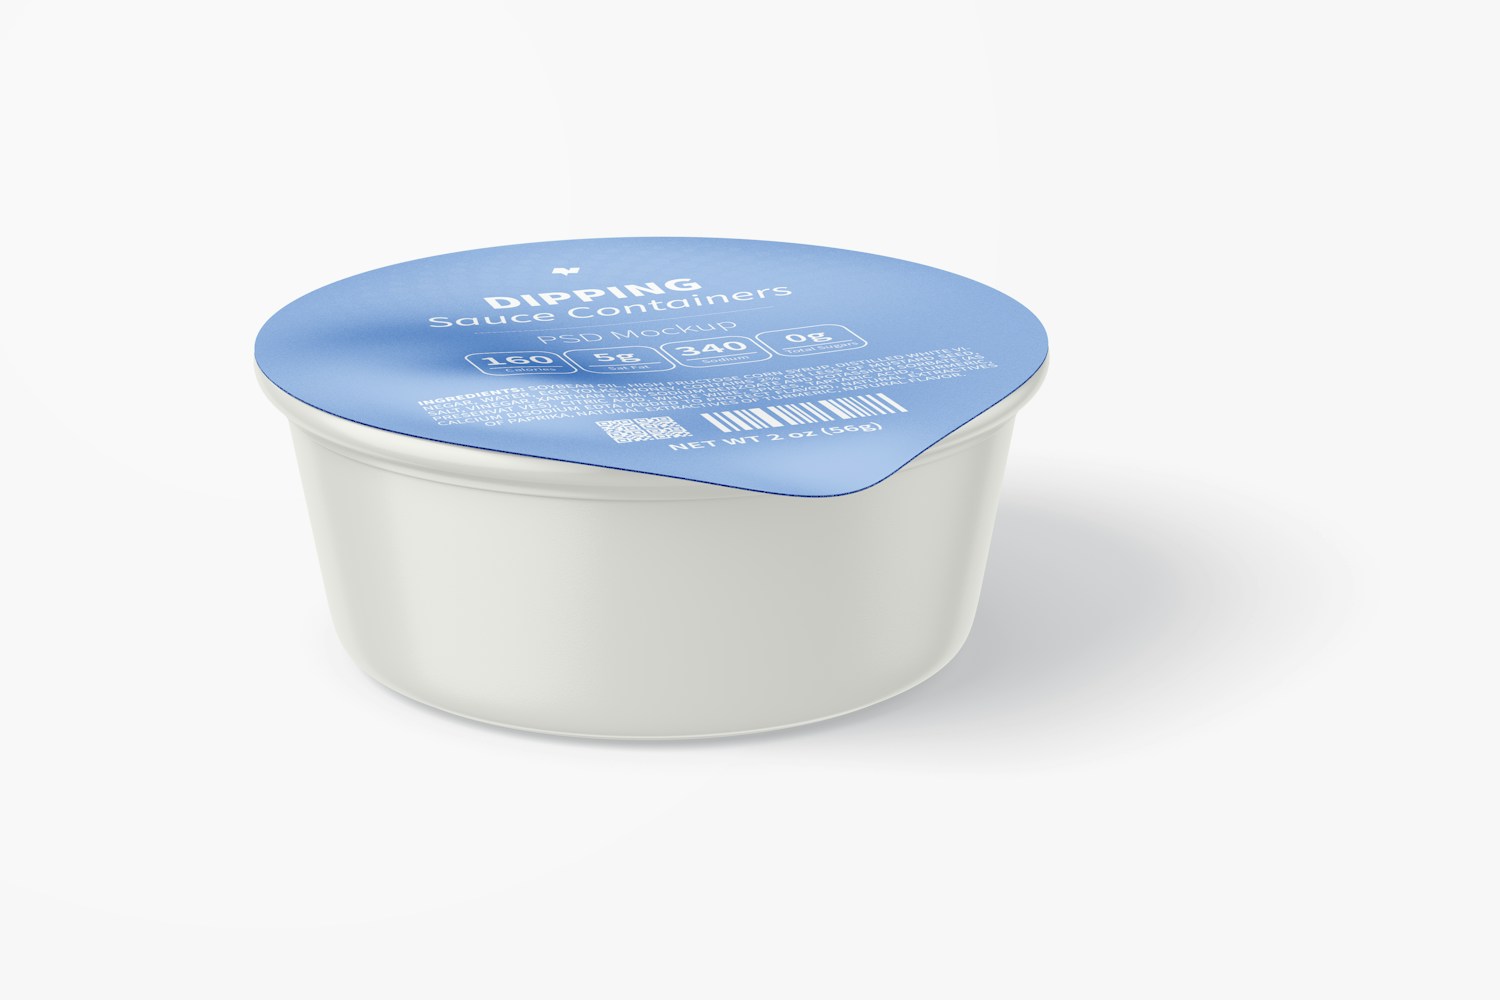 Dipping Sauce Container Mockup